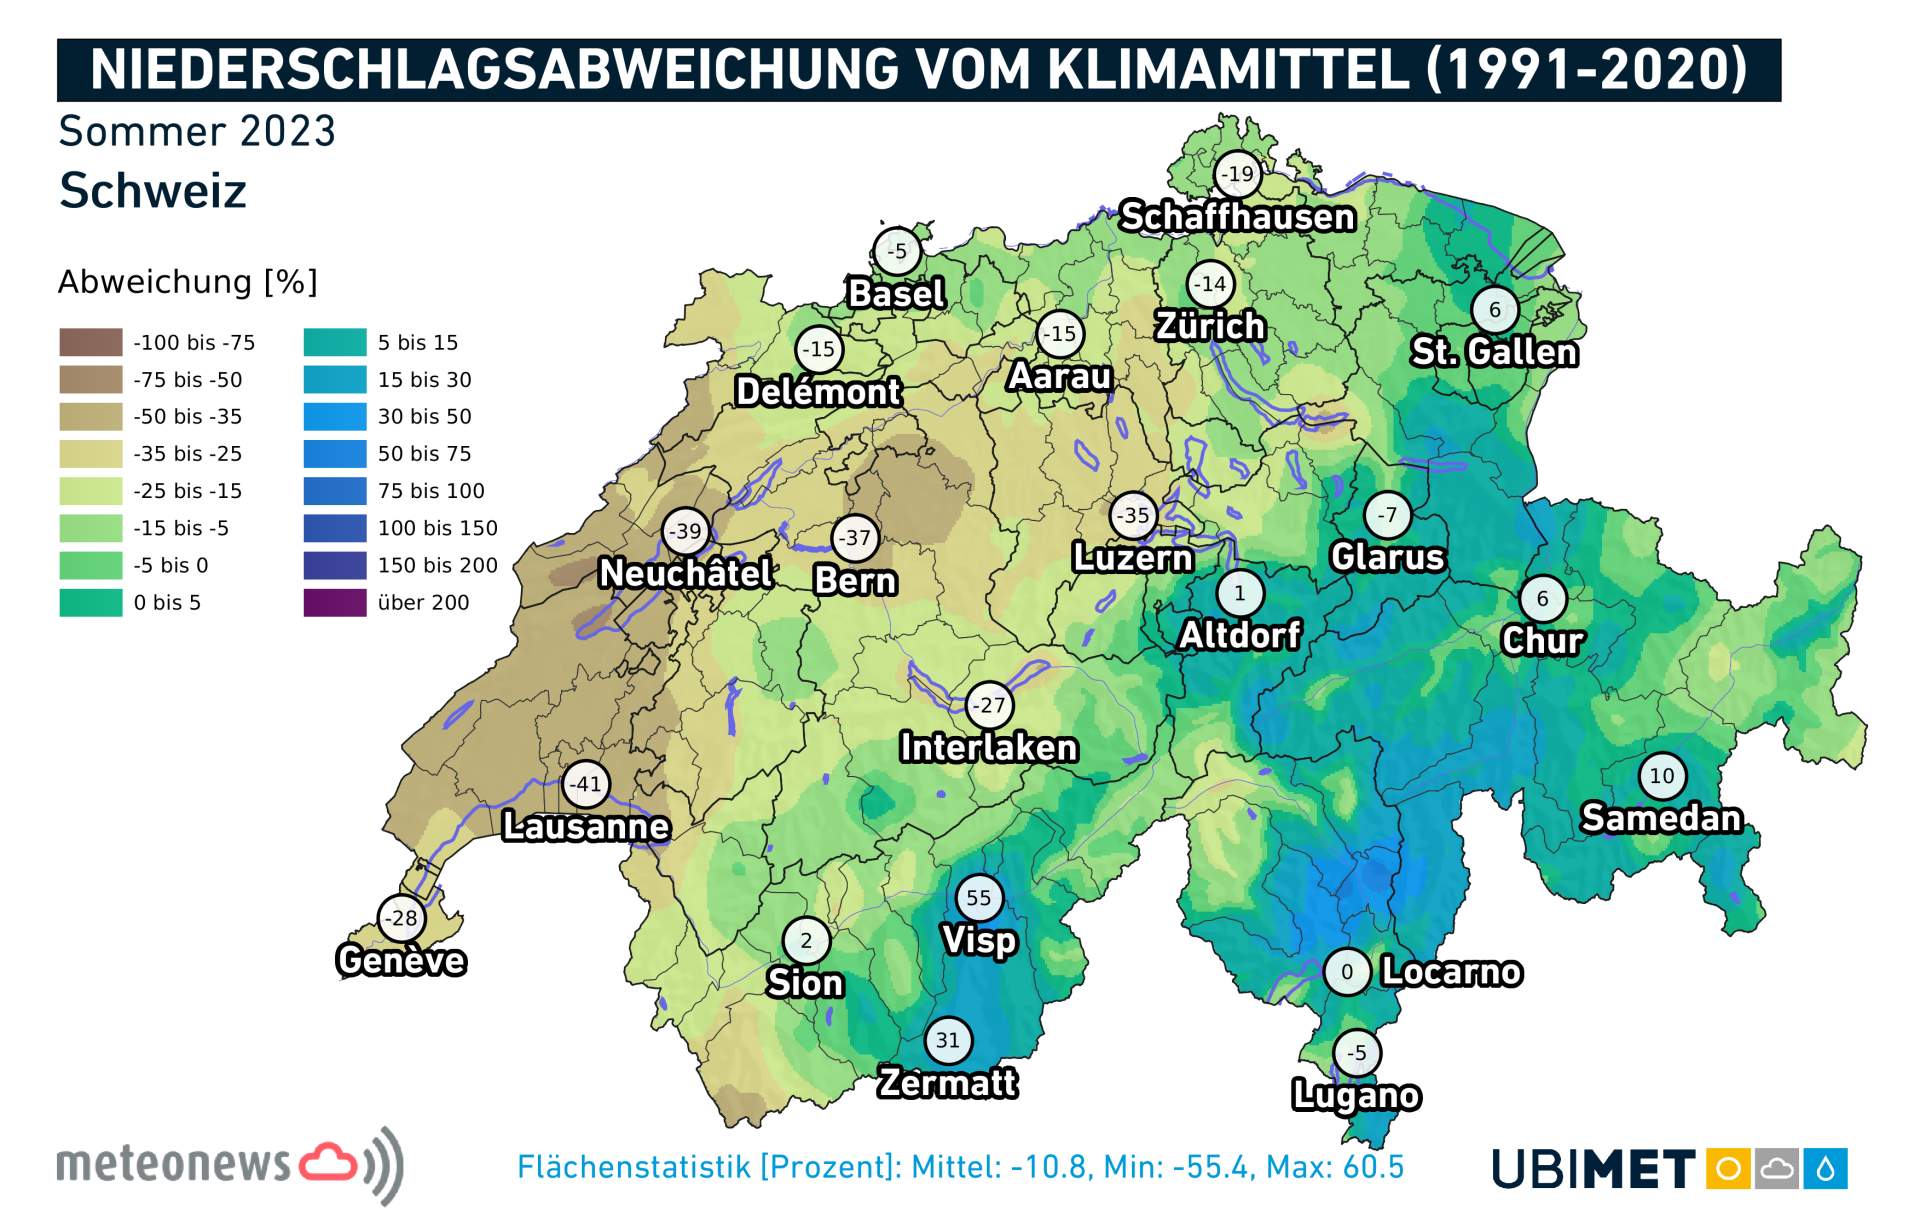 Fig. 3: Precipitation deviation in summer 2023 compared to the climate mean 1991-2020.; Source: MeteoNews, Ubimet